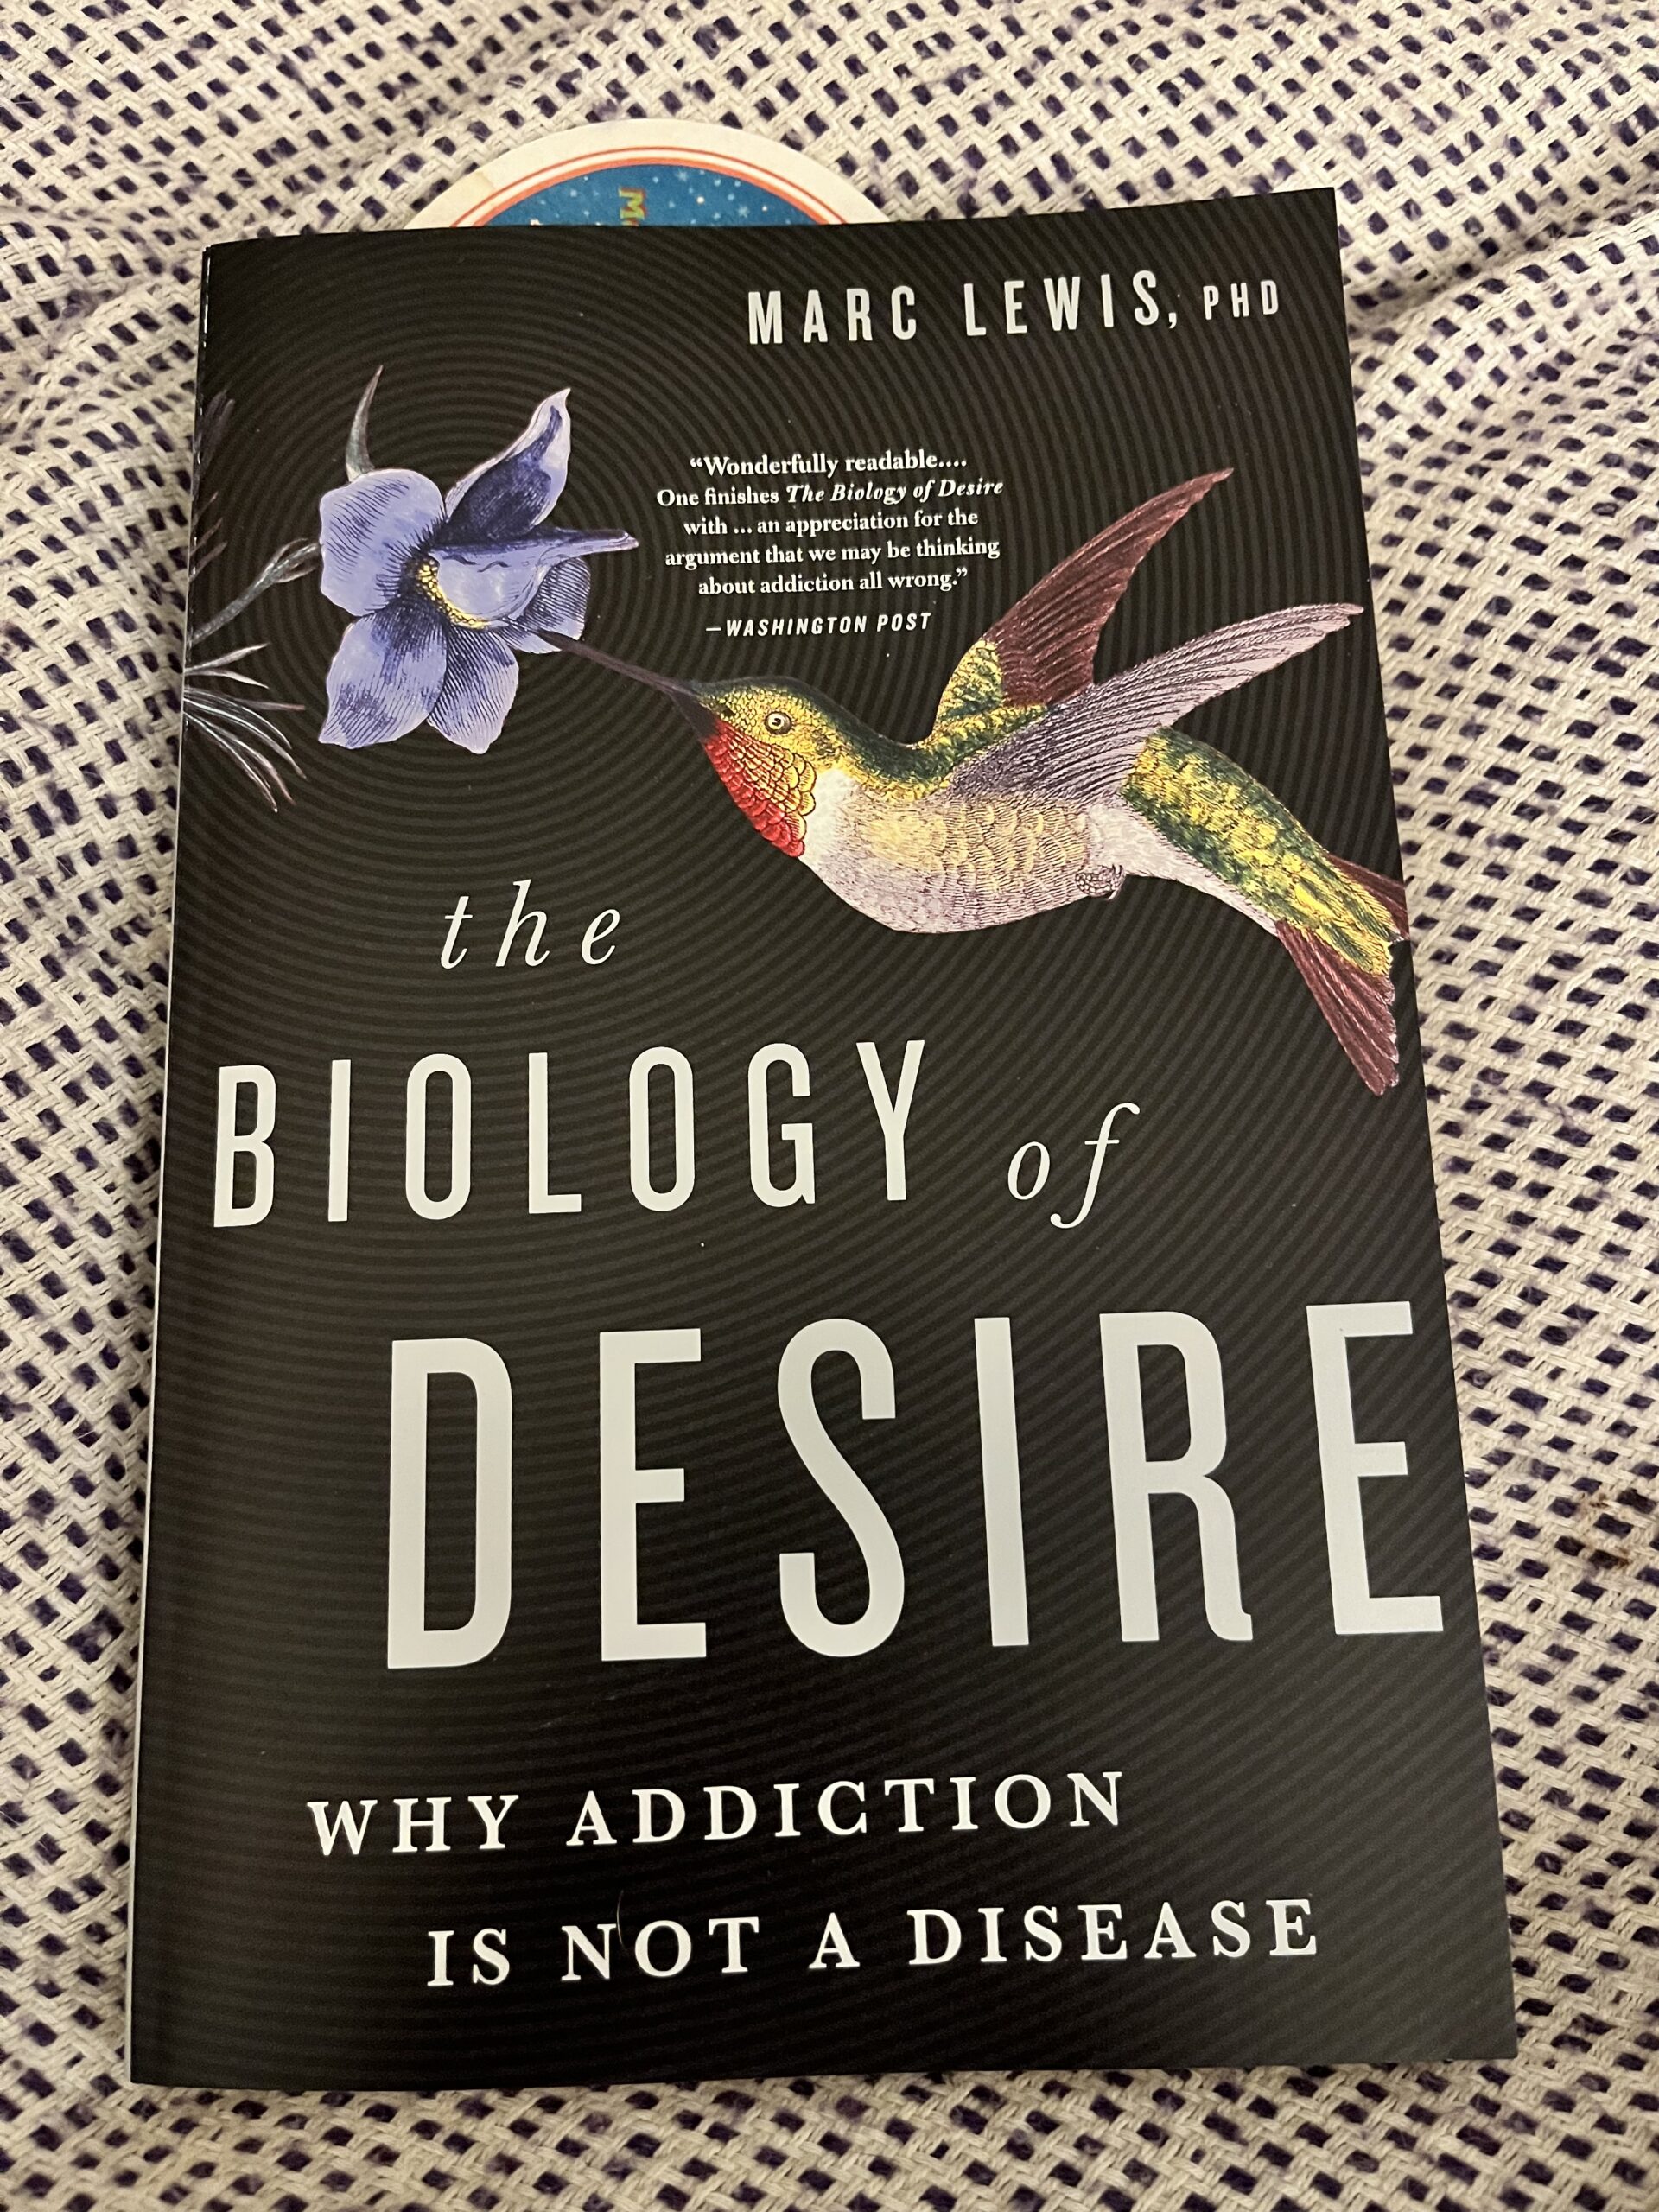 The book, The Biology of Desire: Why Addiction is not a disease, by Marc Lewis